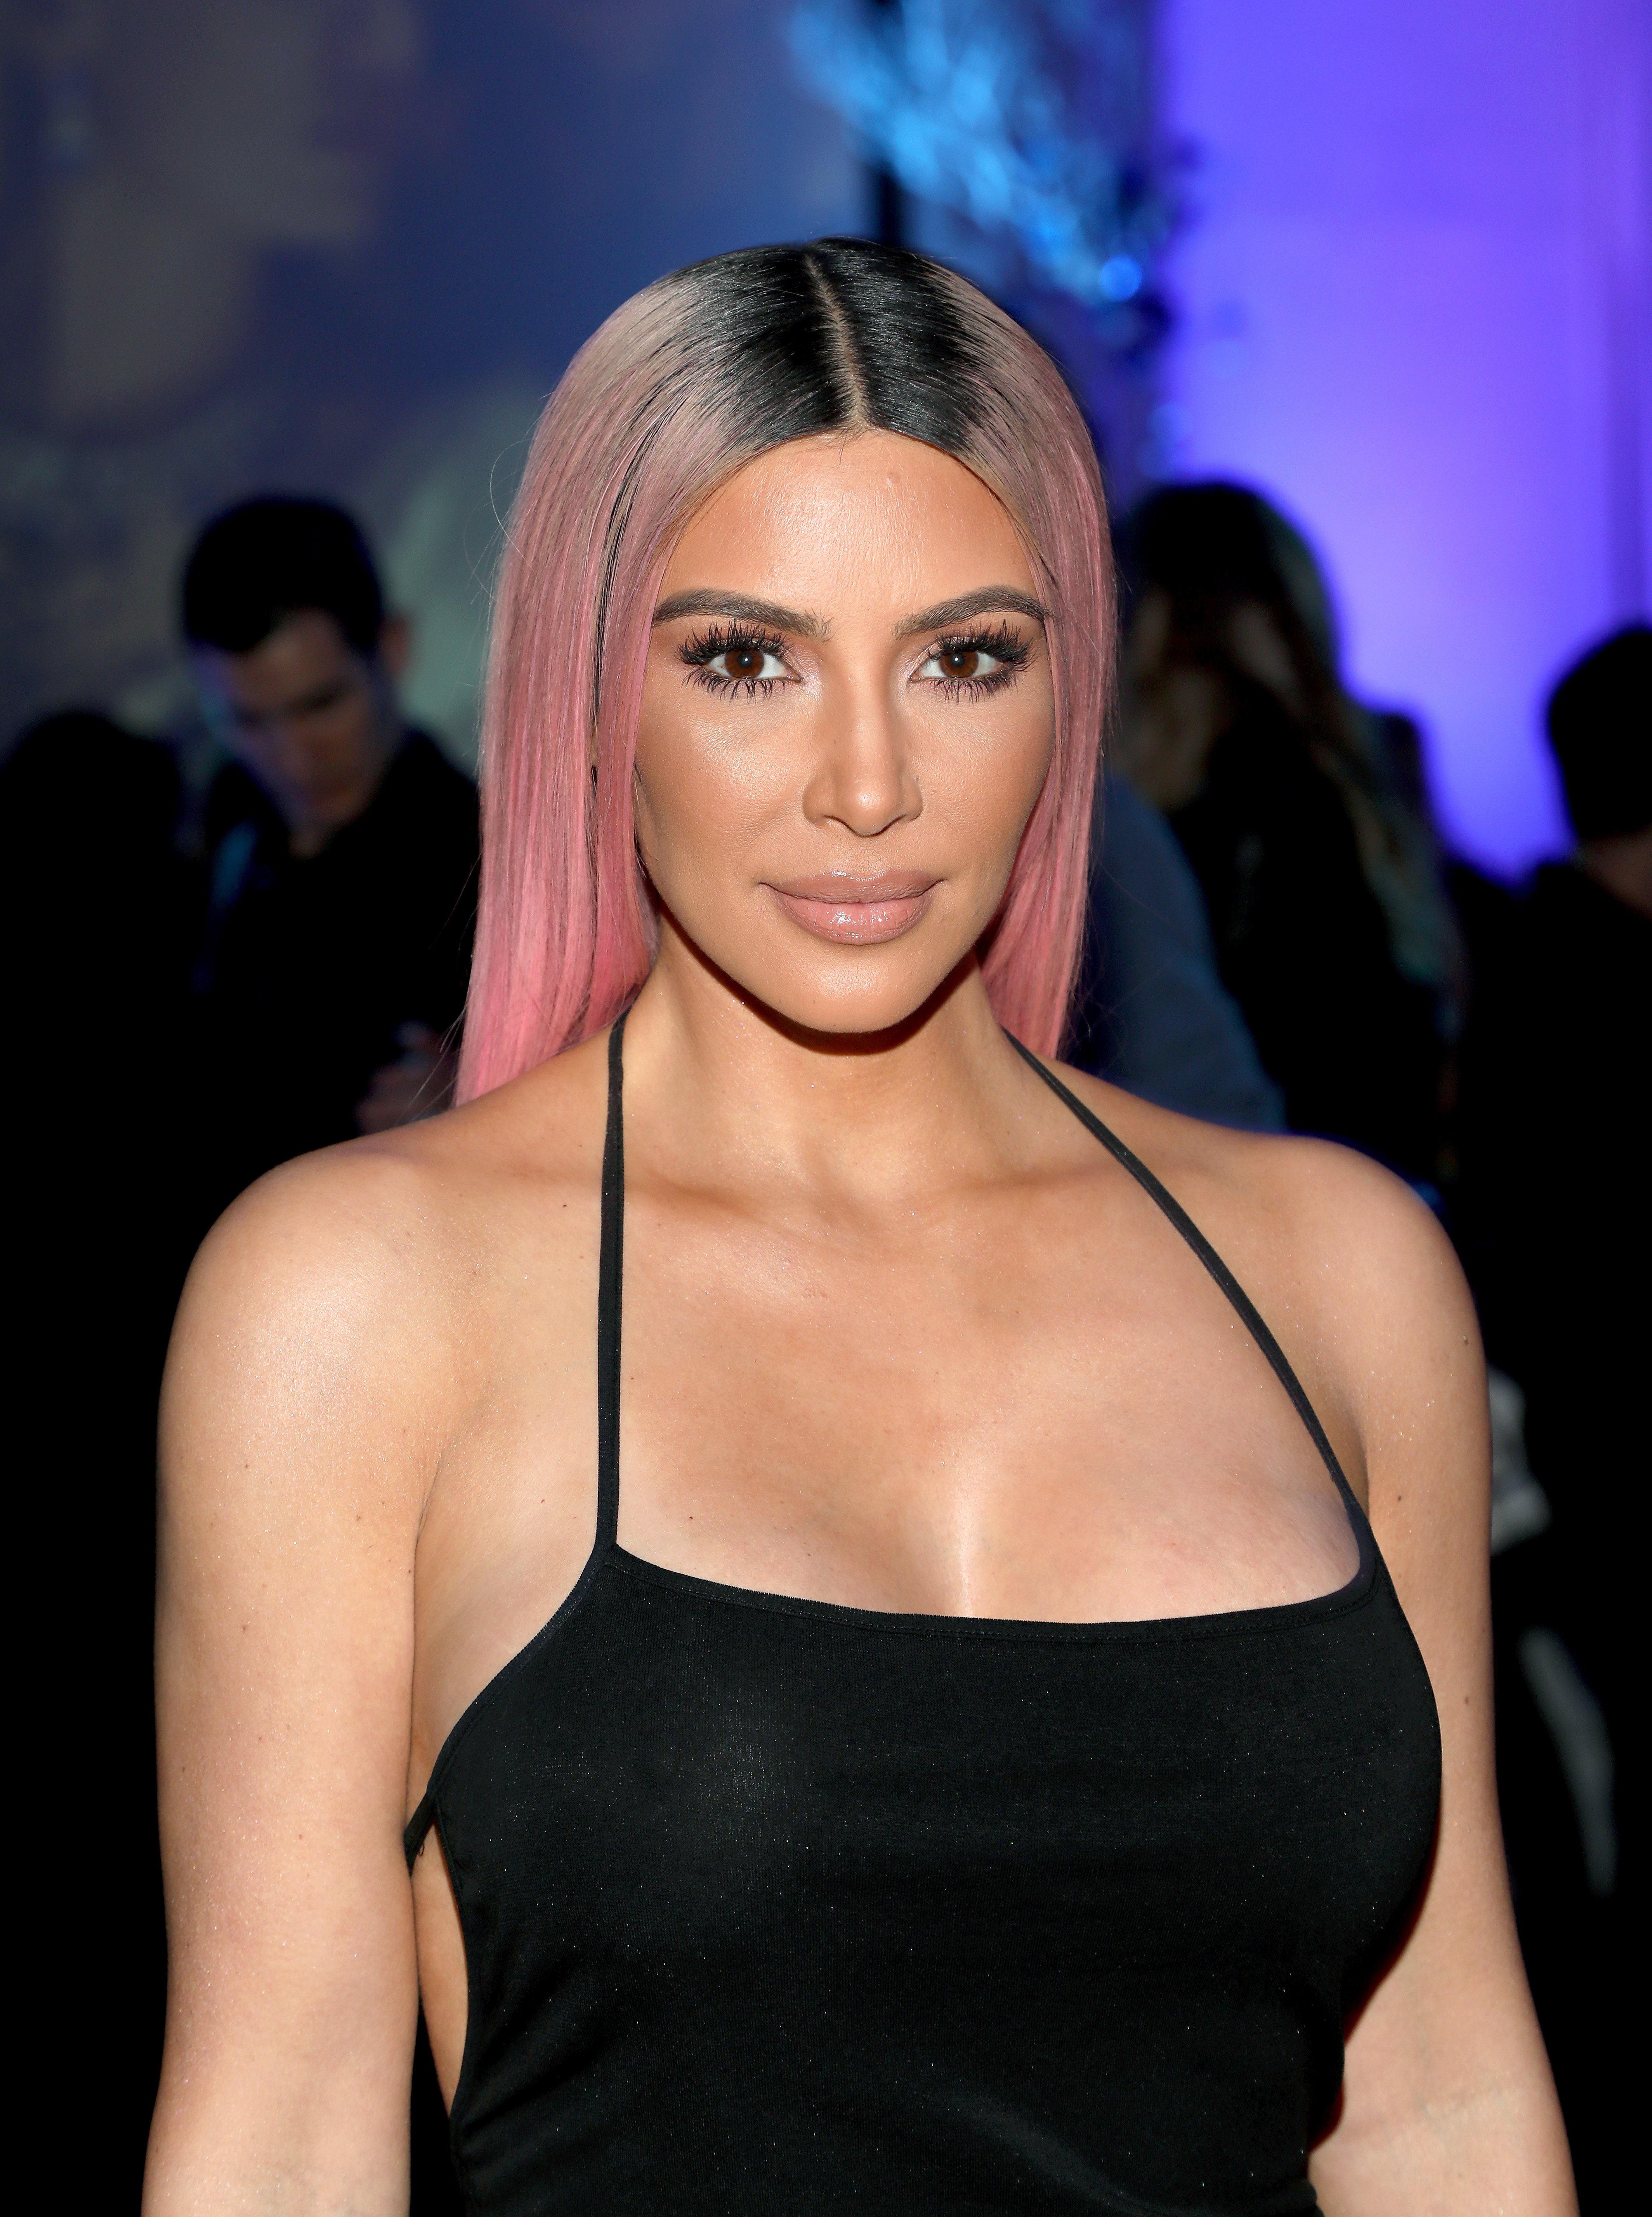 Kim Kardashian at the release of "Fantasize" on March 5, 2018 in Hollywood, California | Photo: Getty Images